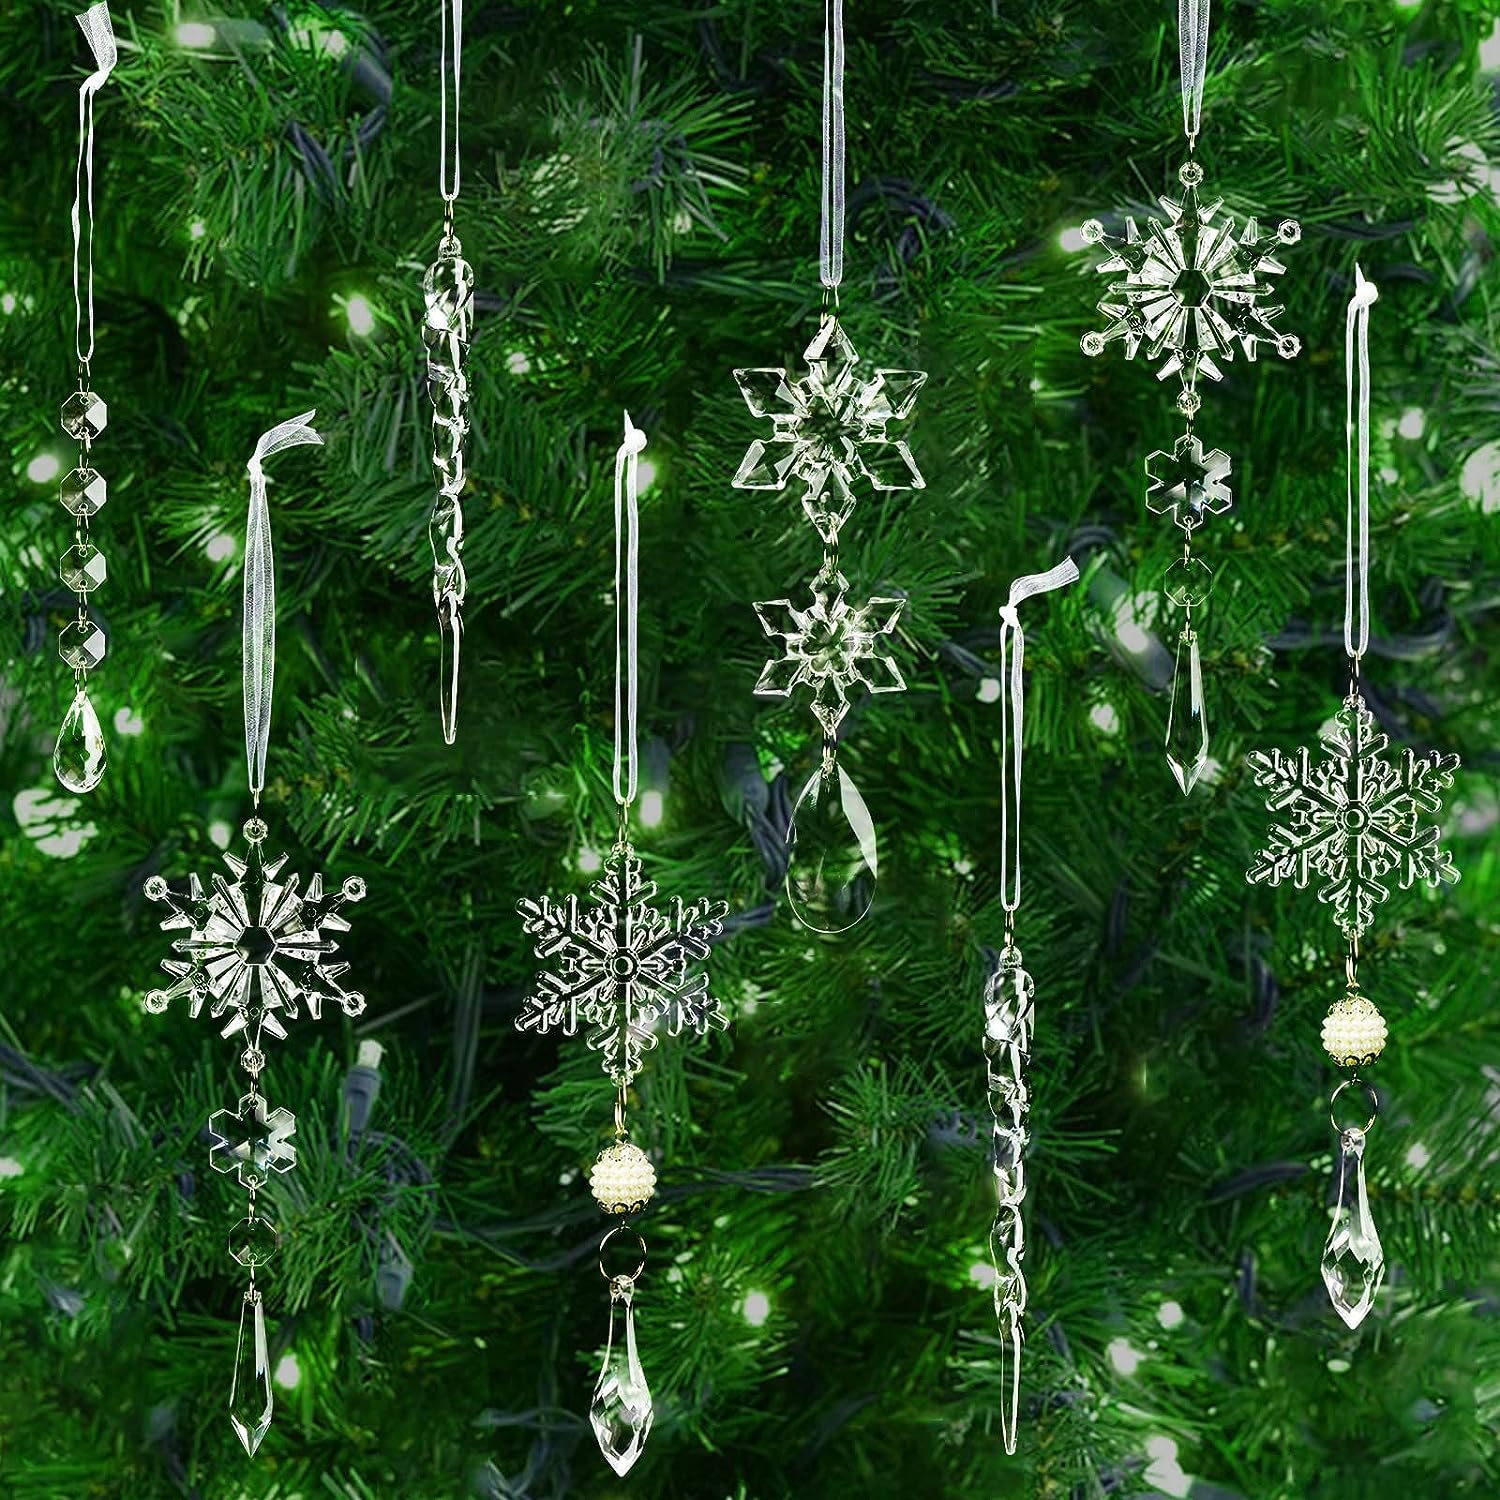  OuMuaMua Christmas Decorations Crystal Ornaments Set for Tree -  Acrylic DIY Ornaments Christmas Hanging Crystal Snowflake Decorations for  Christmas Tree Winter Party Supplies : Home & Kitchen